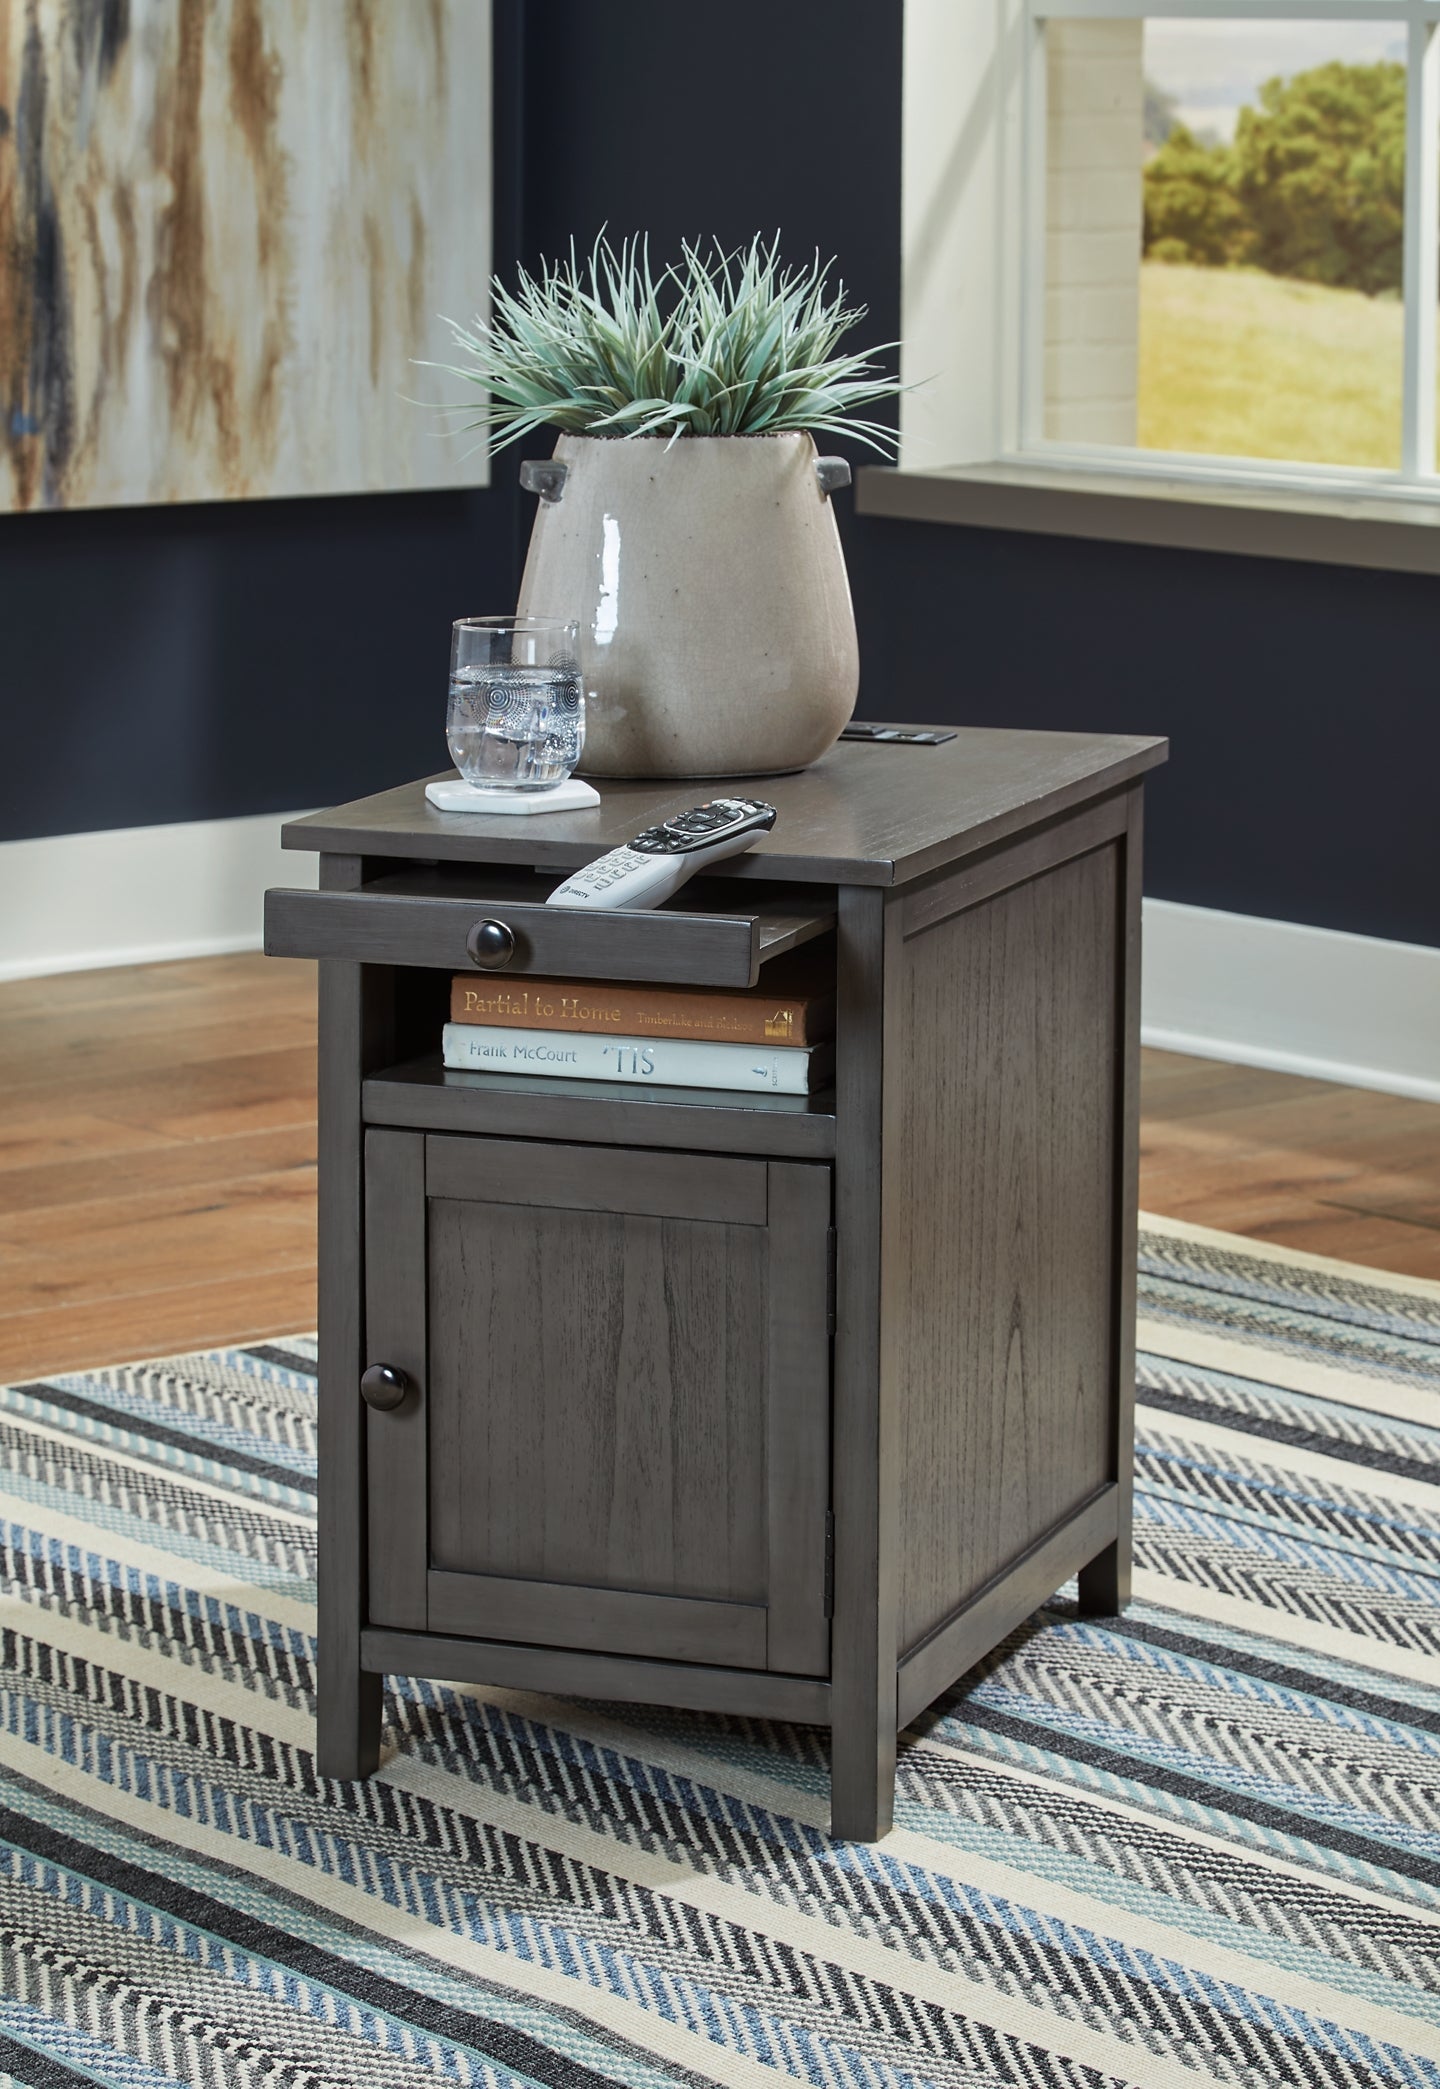 Treytown Chair Side End Table at Cloud 9 Mattress & Furniture furniture, home furnishing, home decor